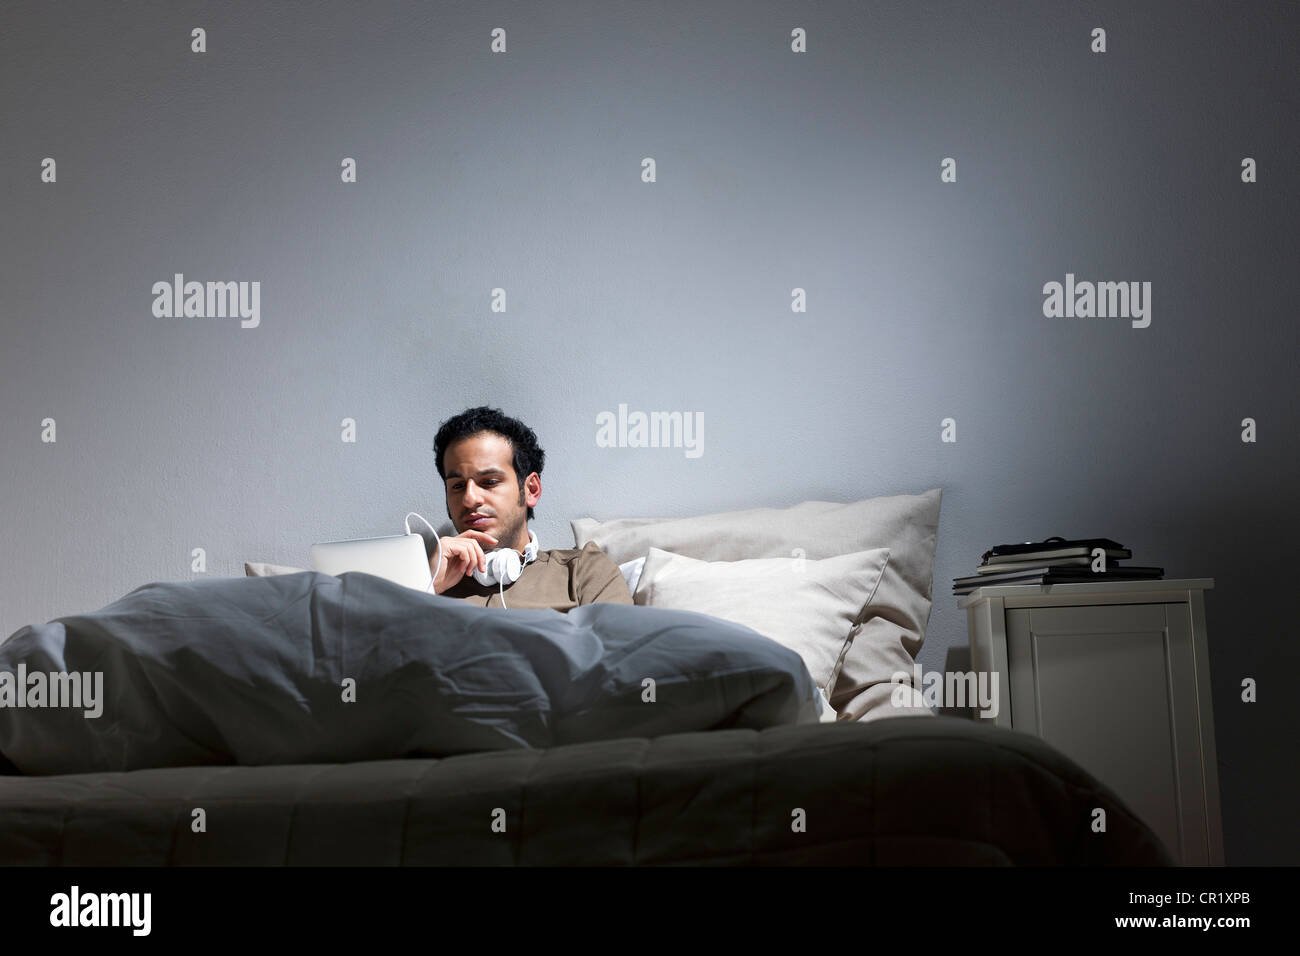 Man using tablet computer in bed Stock Photo